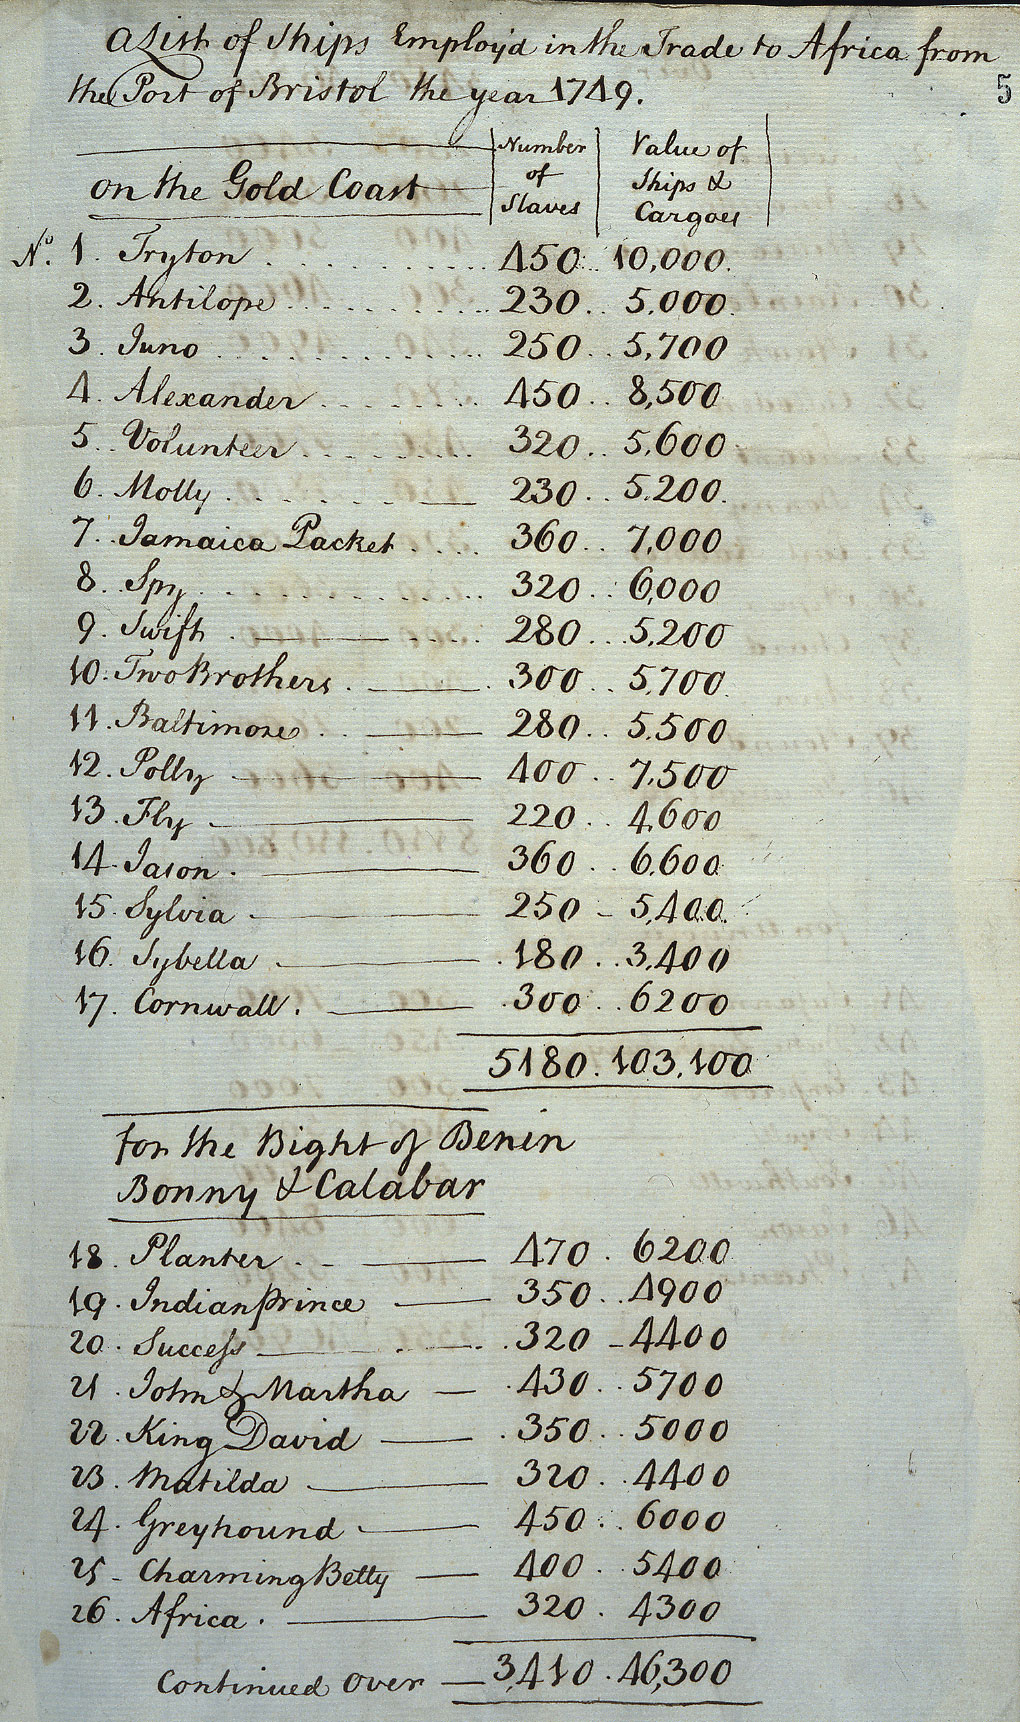 Slave Trade to Africa from the Port of Bristol 1749